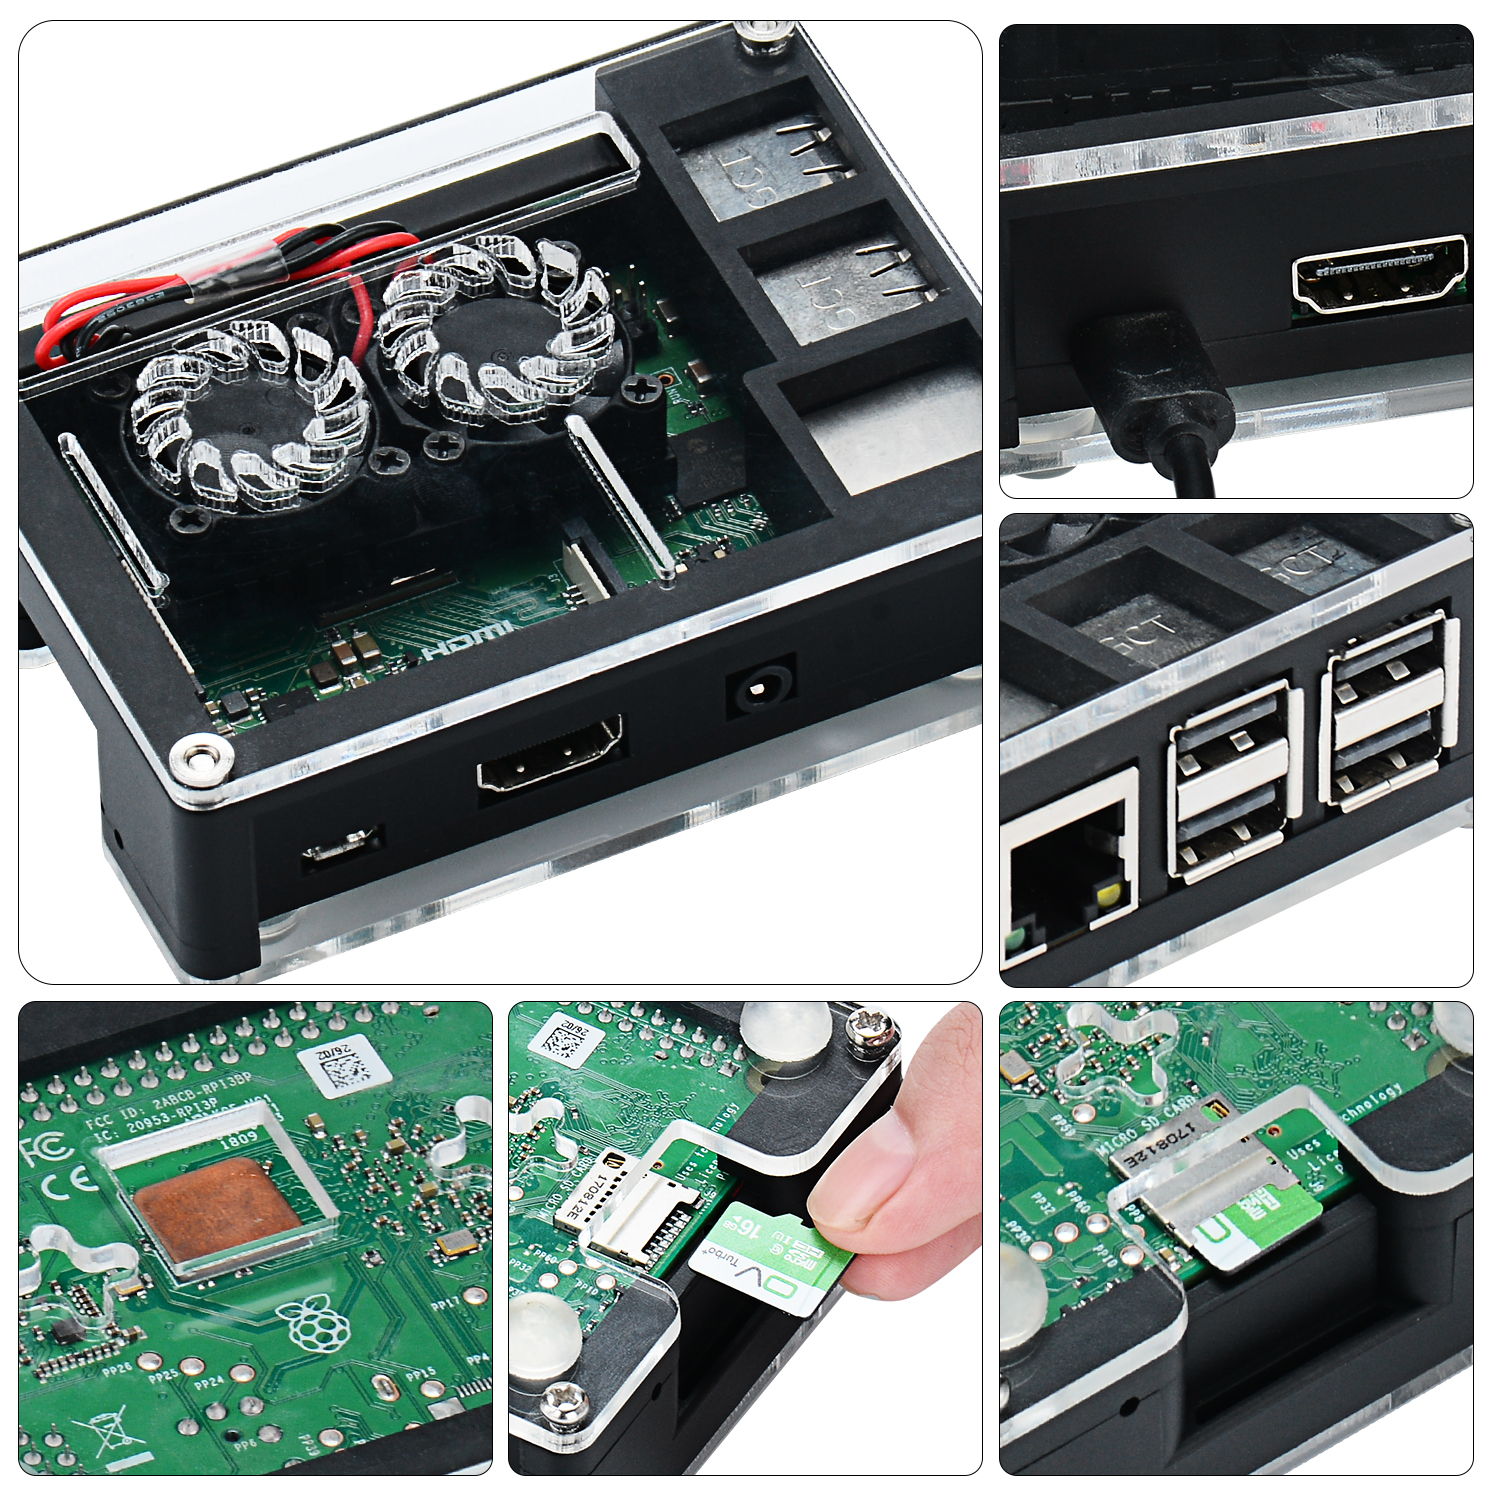 Black-Acrylic-Case-Support-Dual-Cooling-Fans-For-Raspberry-Pi-3B-Board-1411938-1